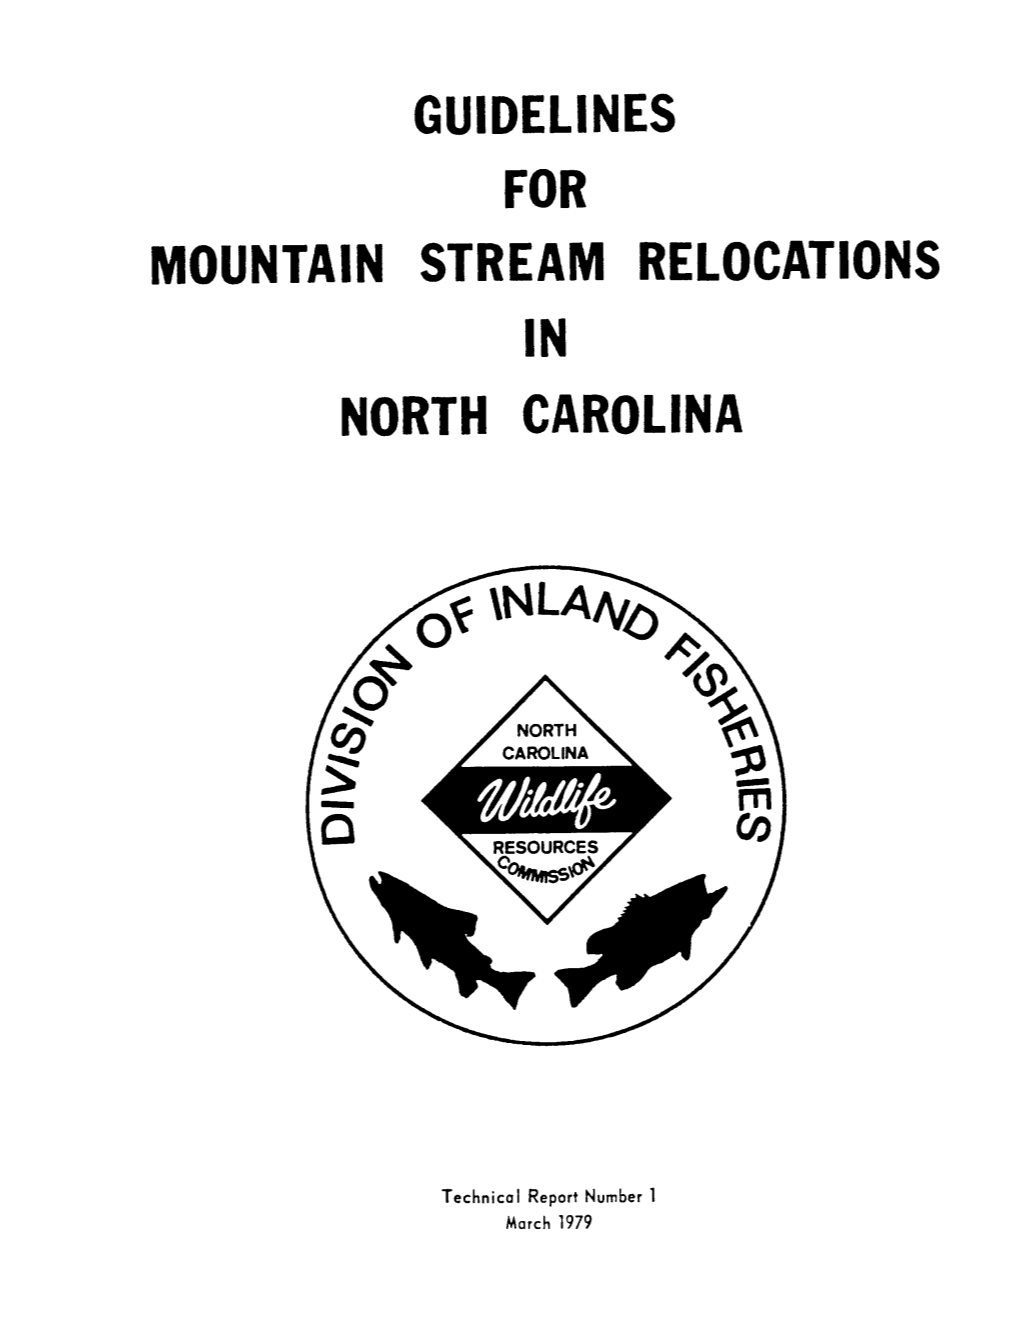 Guidelines for Mountain Stream Relocations in North Carolina